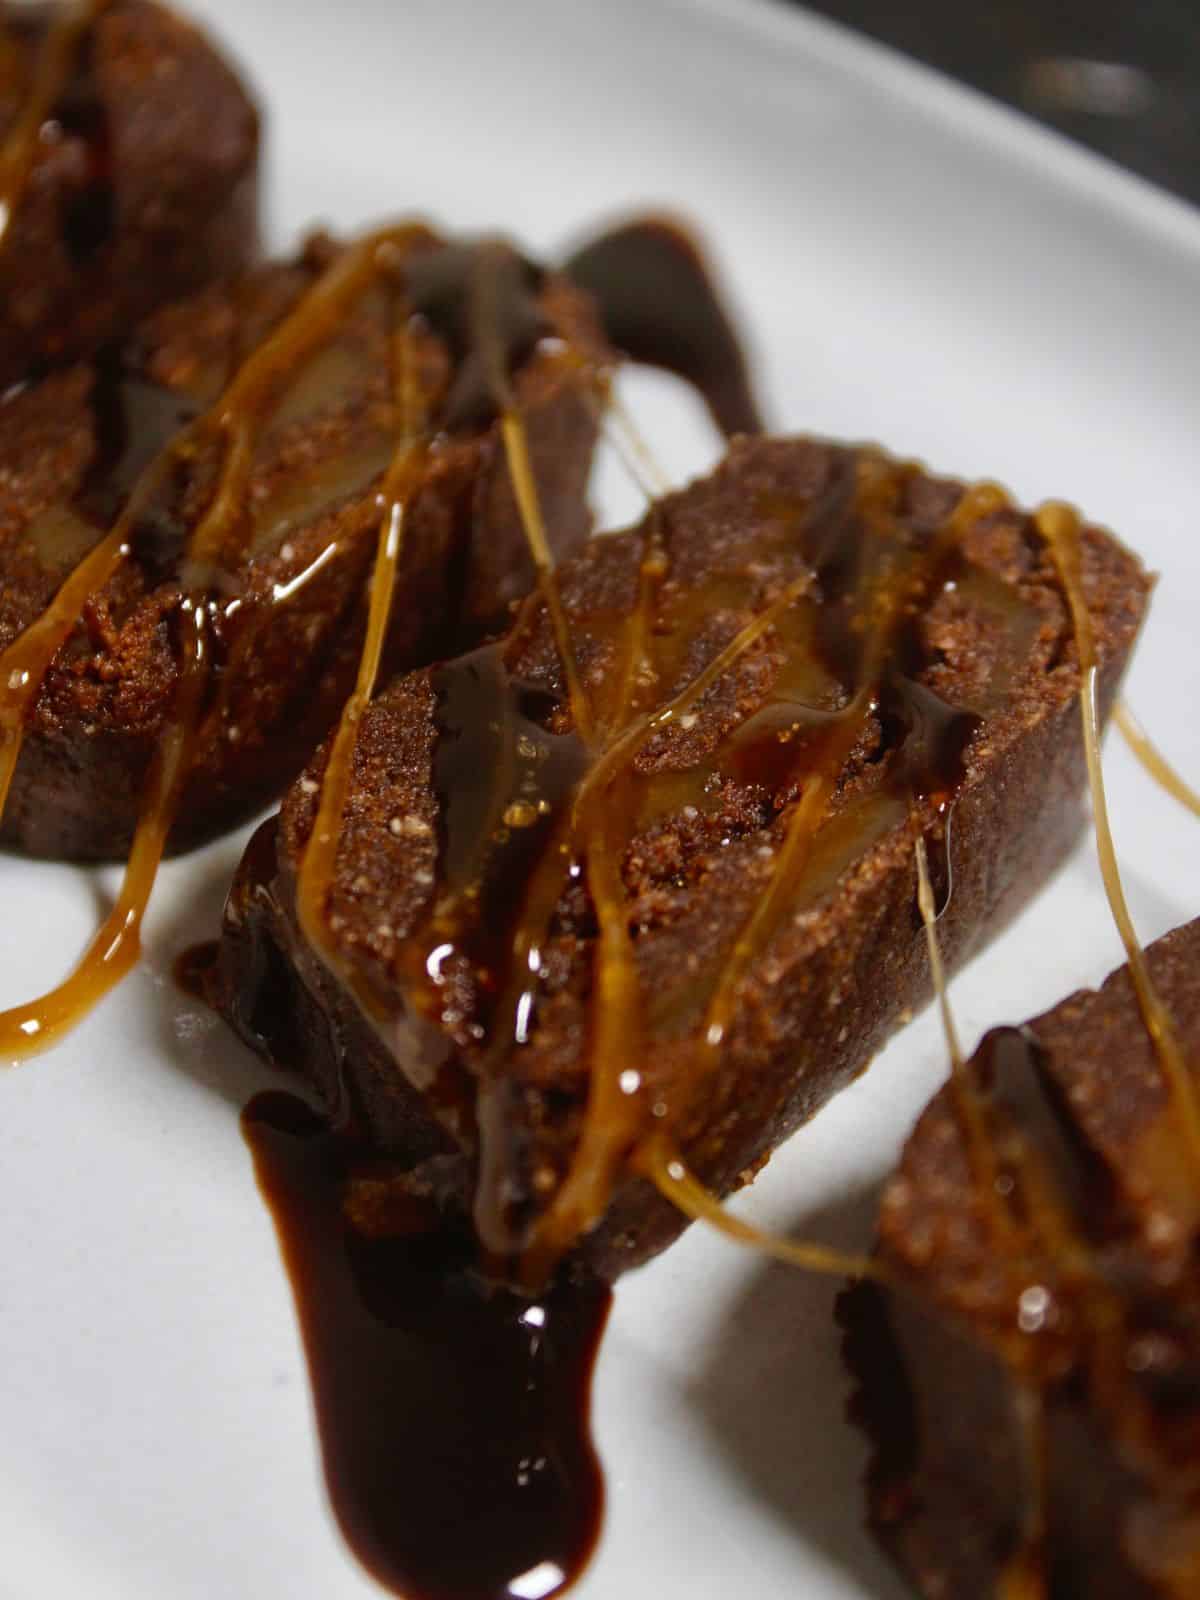 Diagonal view of Peanut and Chocolate Bites with Caramel Filling